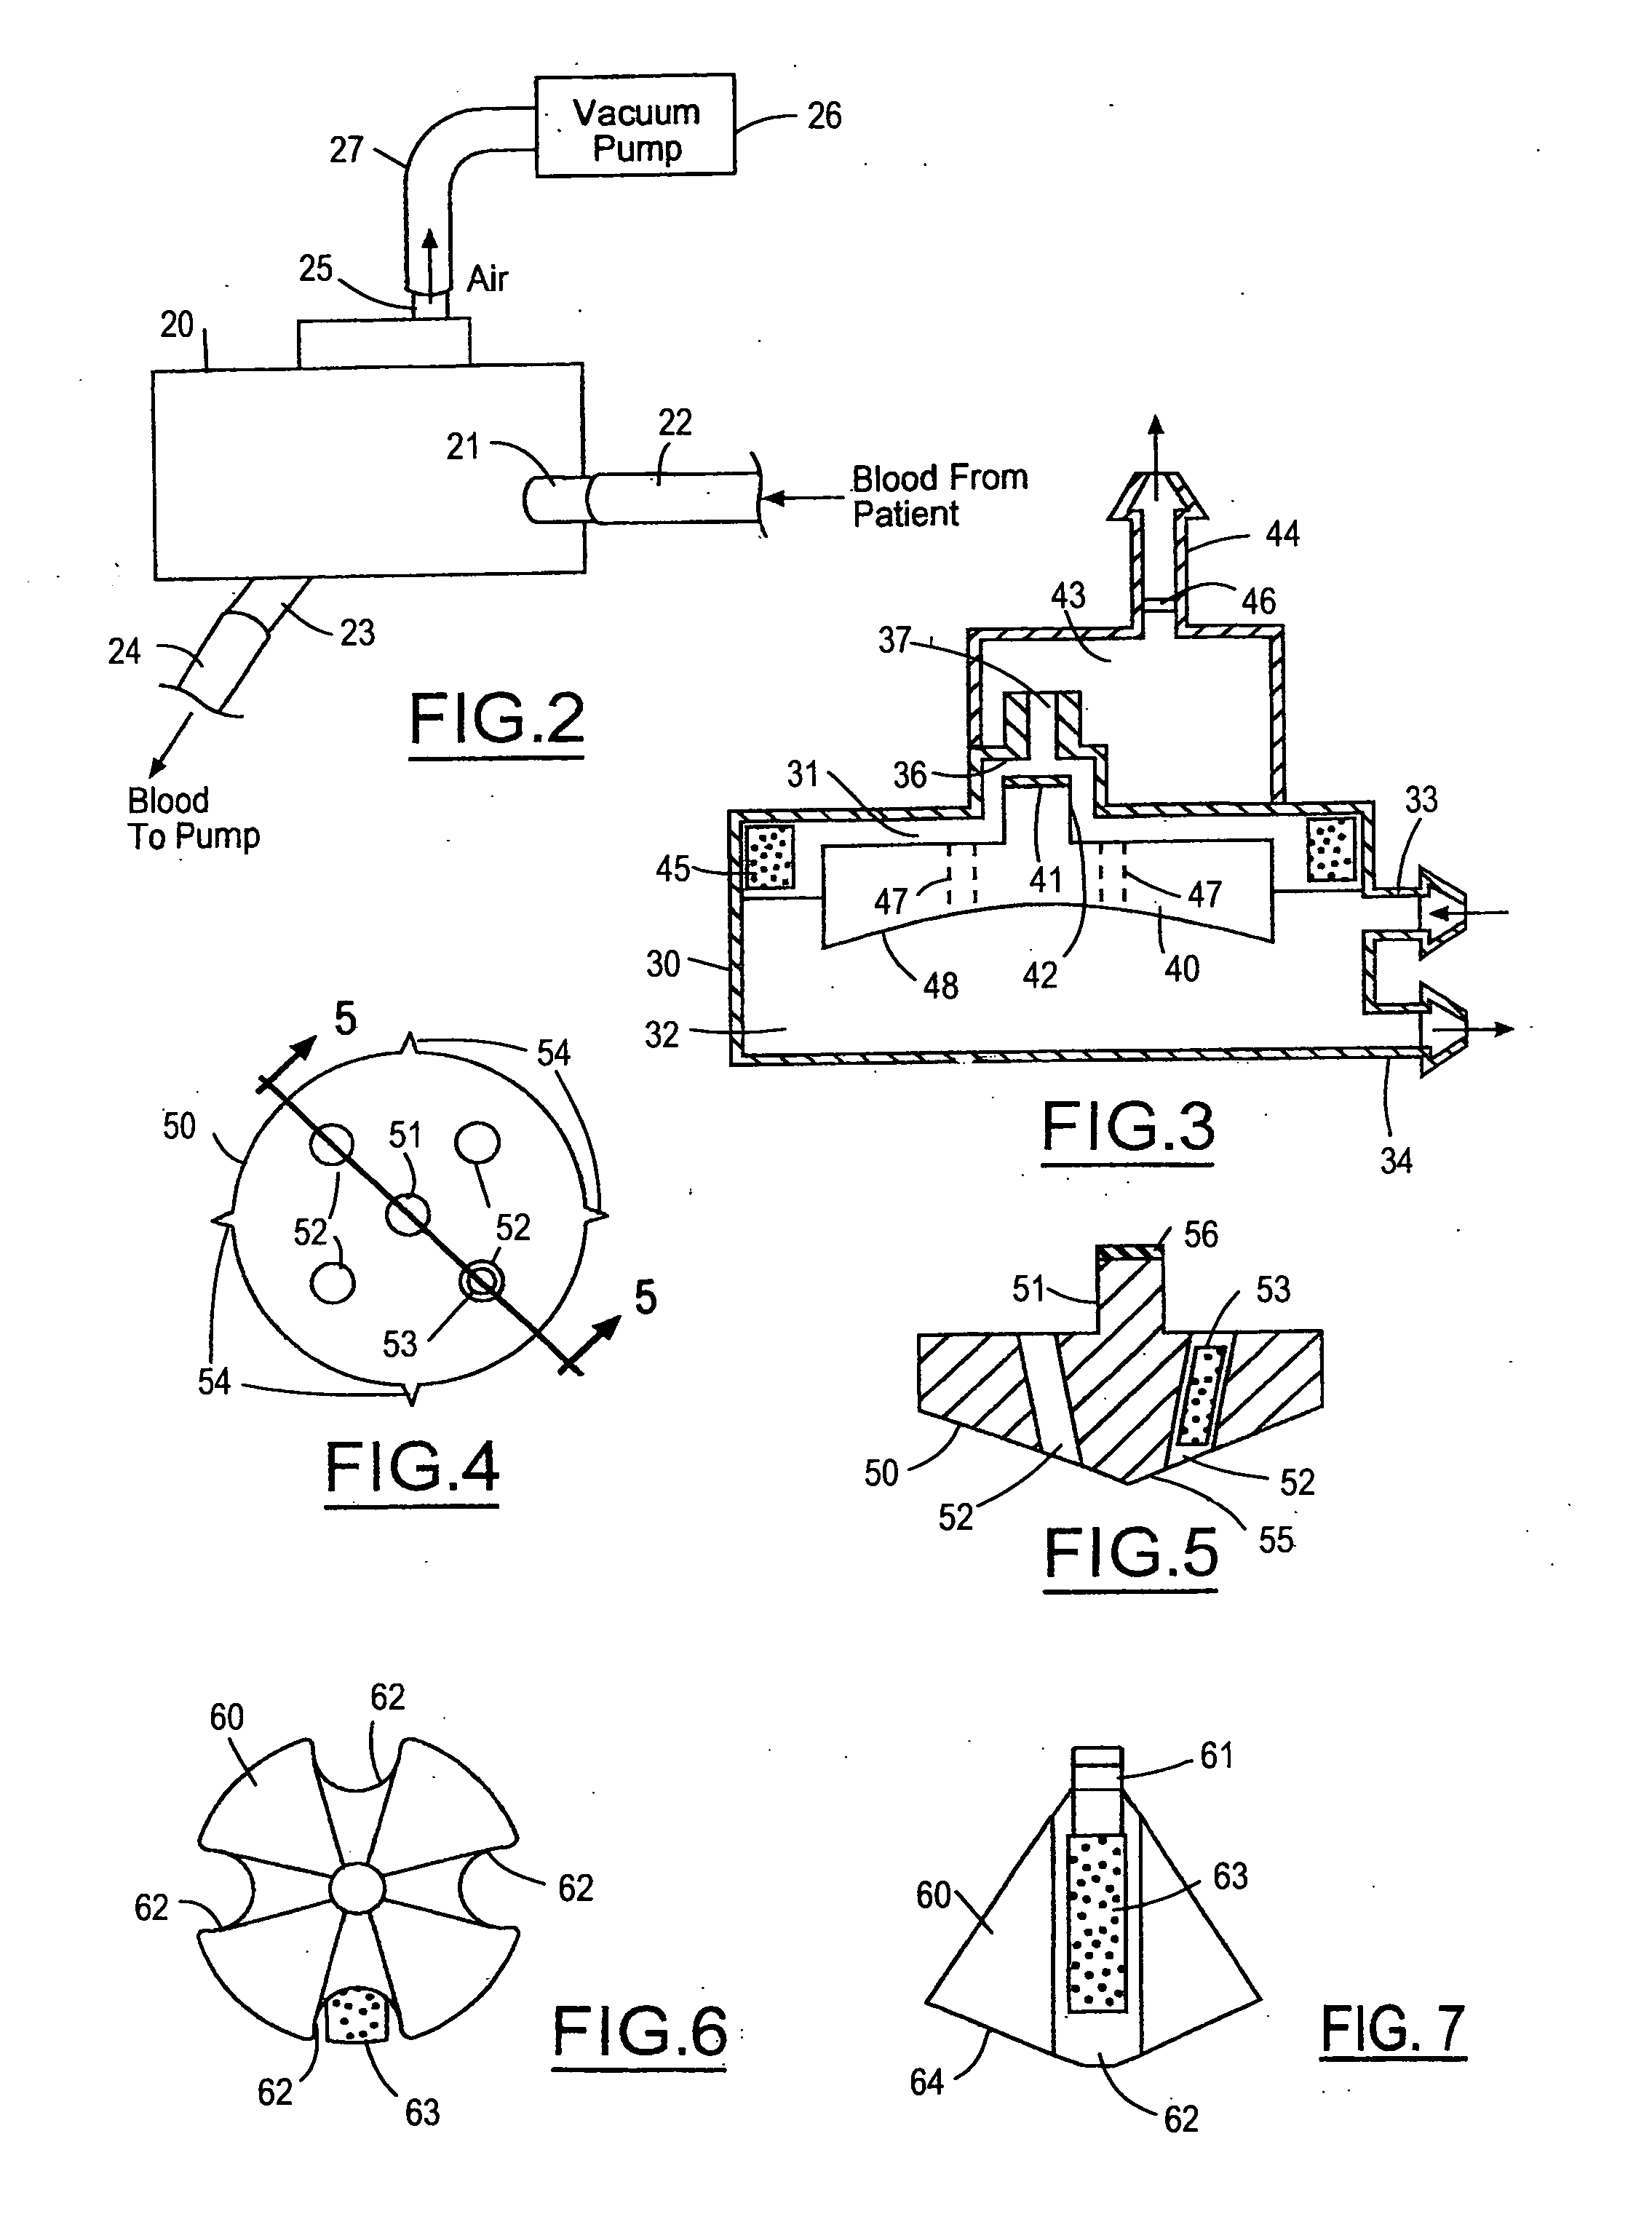 Air removal device with float valve for blood perfusion system